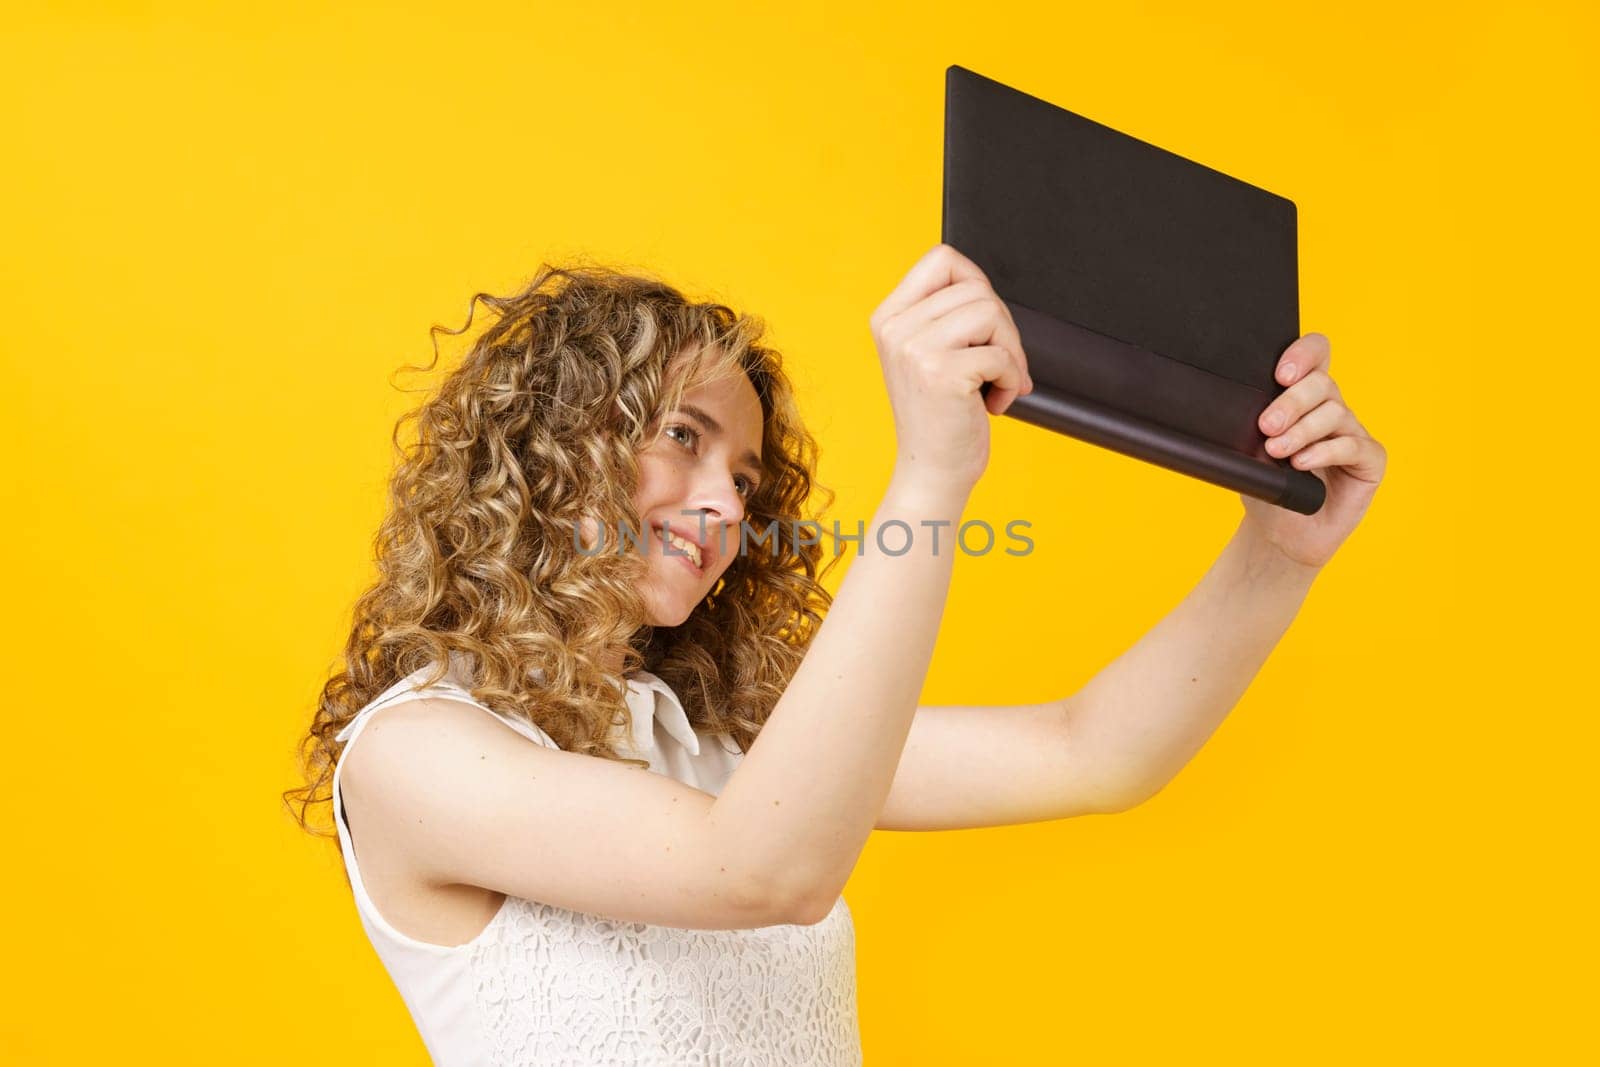 Portrait of a young woman who communicates on a tablet. Female portrait. Isolated on yellow background